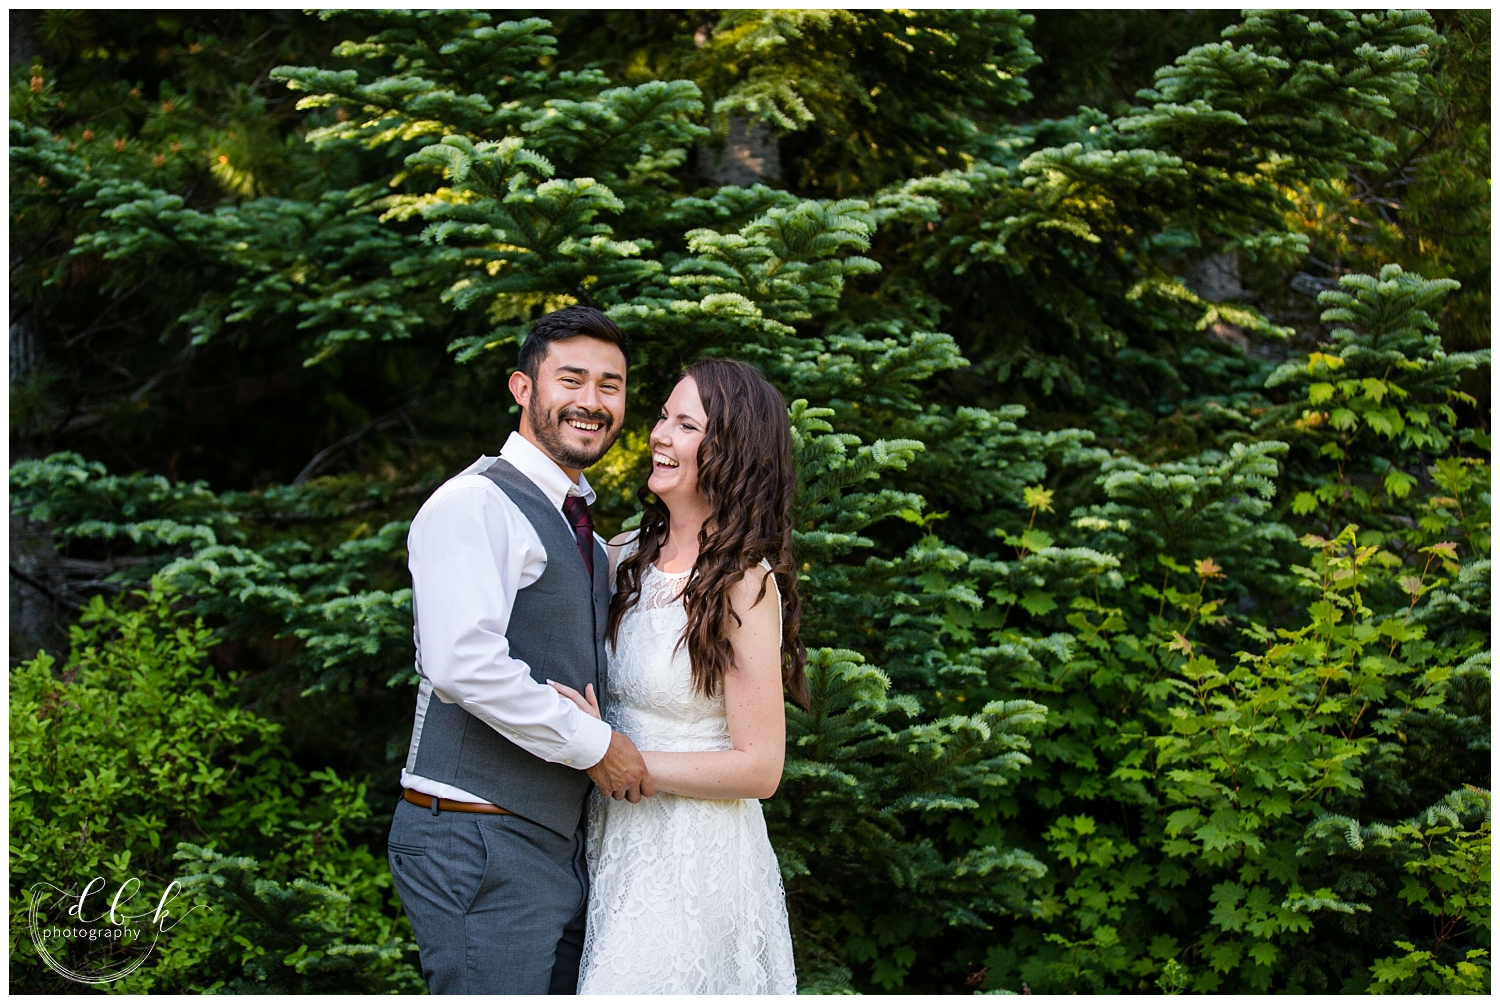 wedding couple laughing together among evergreen trees in Snoqualmie Forest at Gold Creek Pond